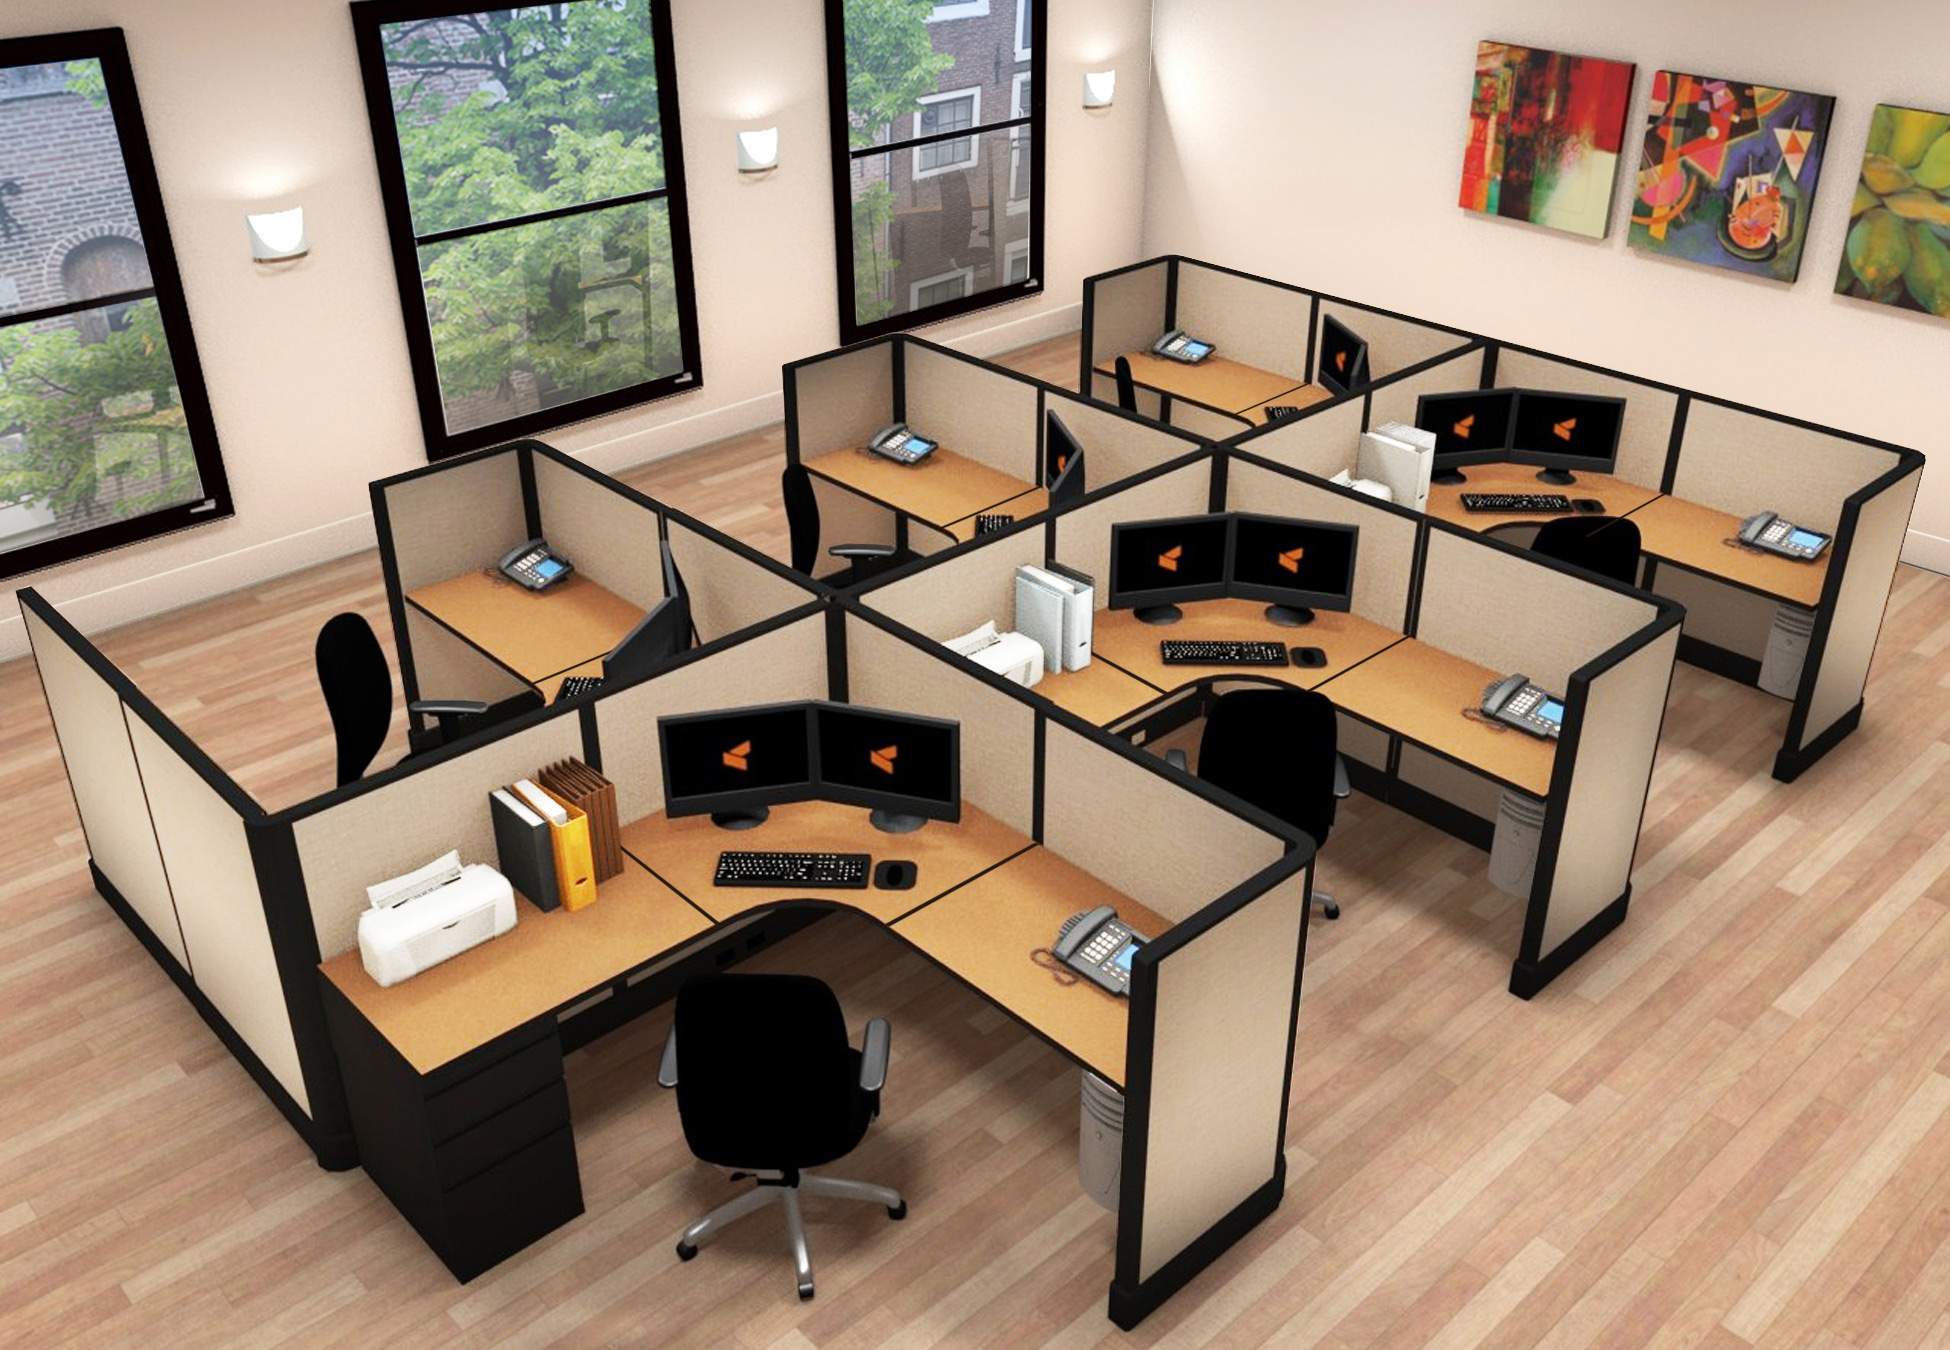 Home Office Cubicle Desk Ideas To Make Your Cubicle A Place Youll Love Officedesk The Art